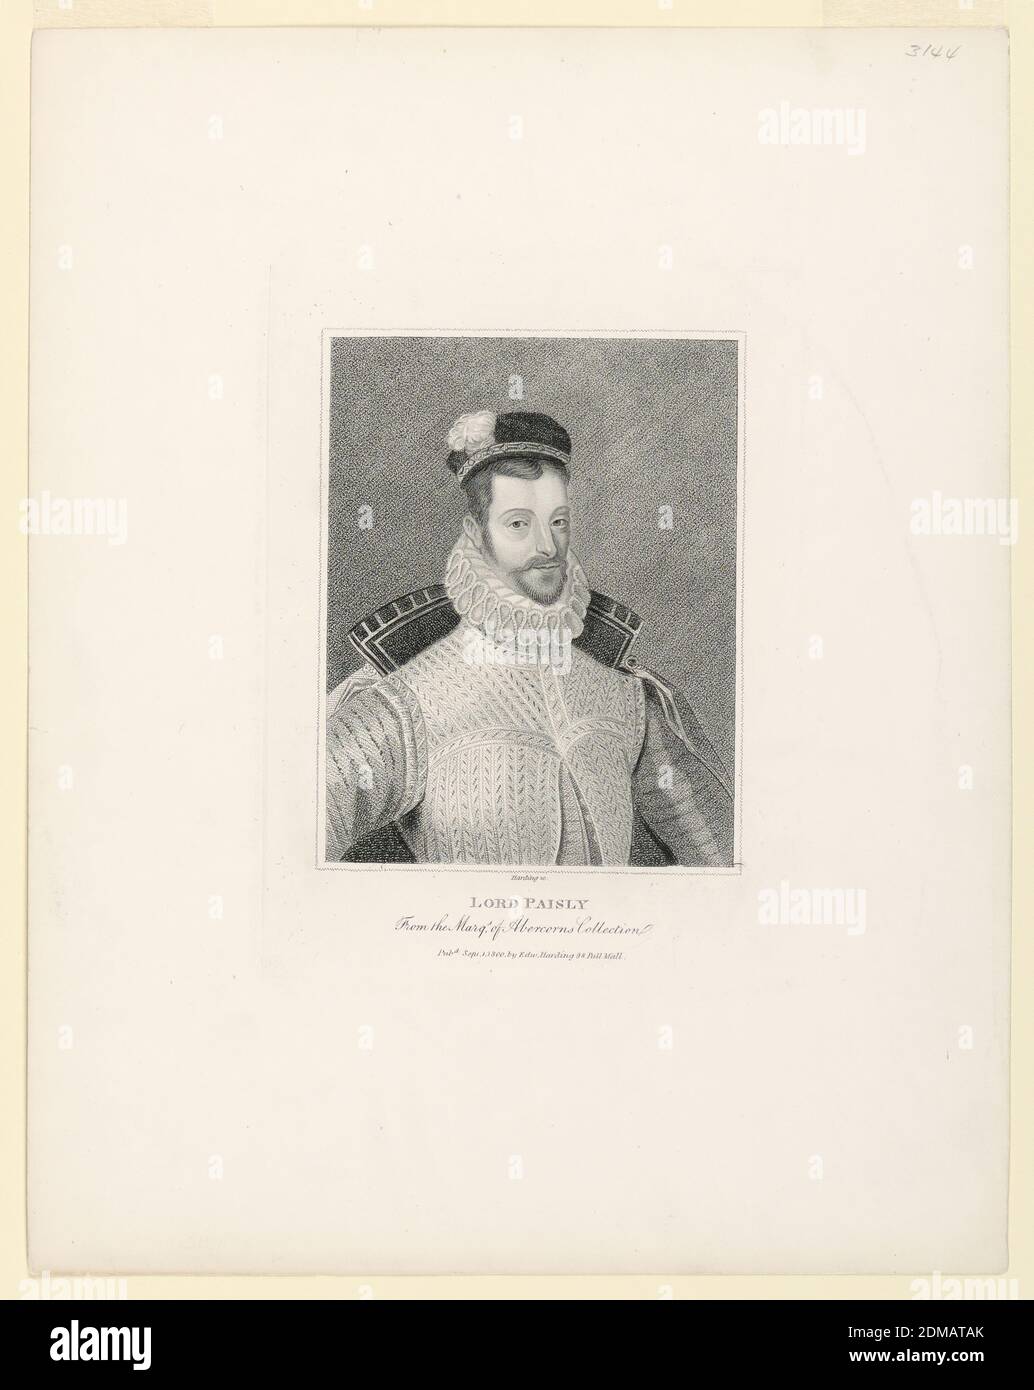 Portrait of Claude Hamilton, Earl of Paisley, Edward Harding, British, 1755 - 1840, Stipple engraving on paper, Half-length portrait of Claude Hamilton, Earl of Paisley (ca. 1543-1622), dressed in half armor, doublet and cape, a feather trimmed velvet beret on his head. He faces frontally, turned slightly to the right. Below, inscription, engraver's and publisher's names., England, 1800, Print Stock Photo